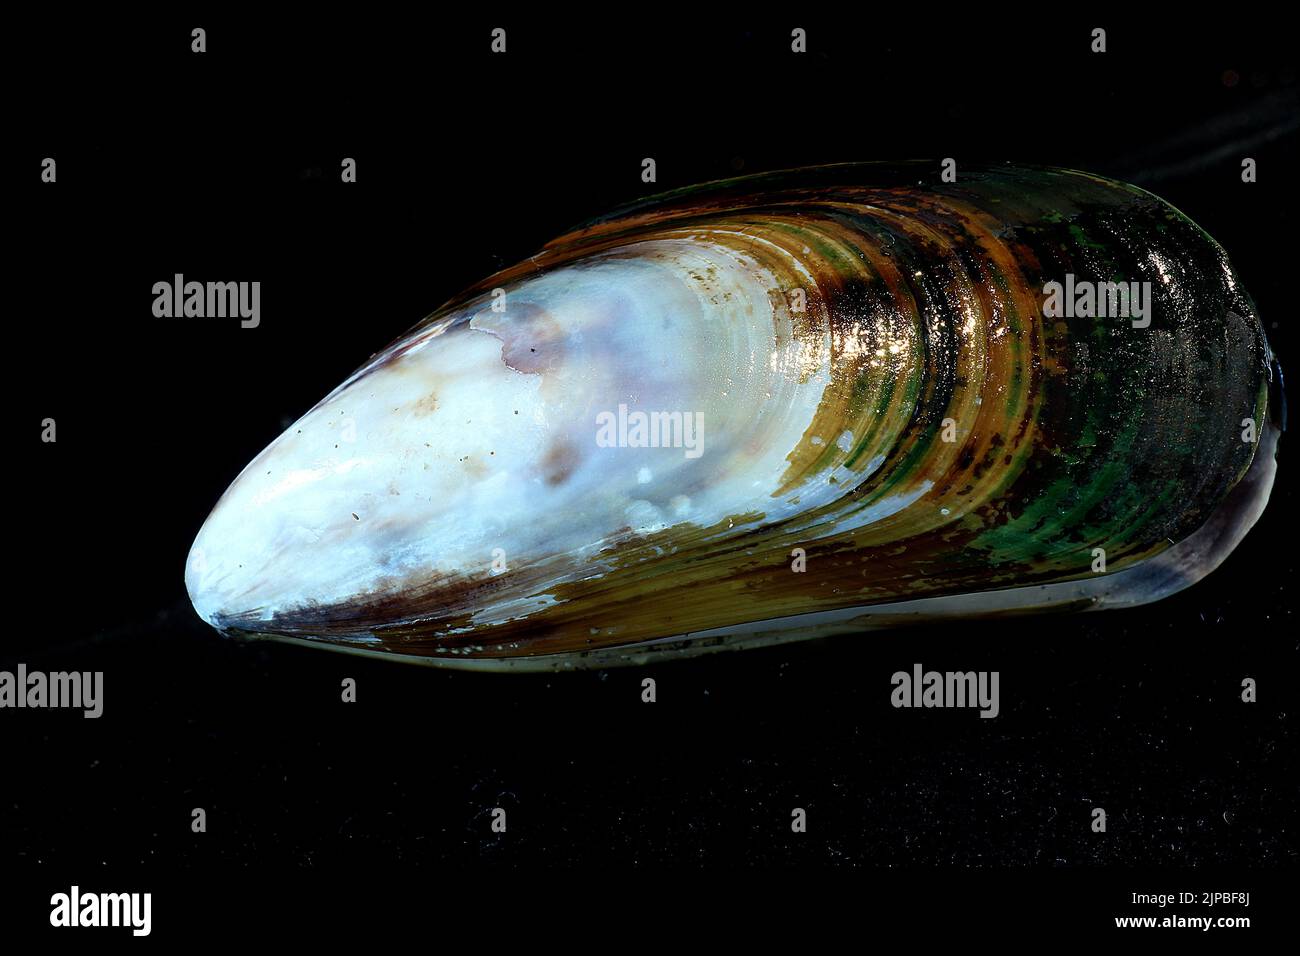 New Zealand green-lipped mussel (Perna canaliculus) Stock Photo